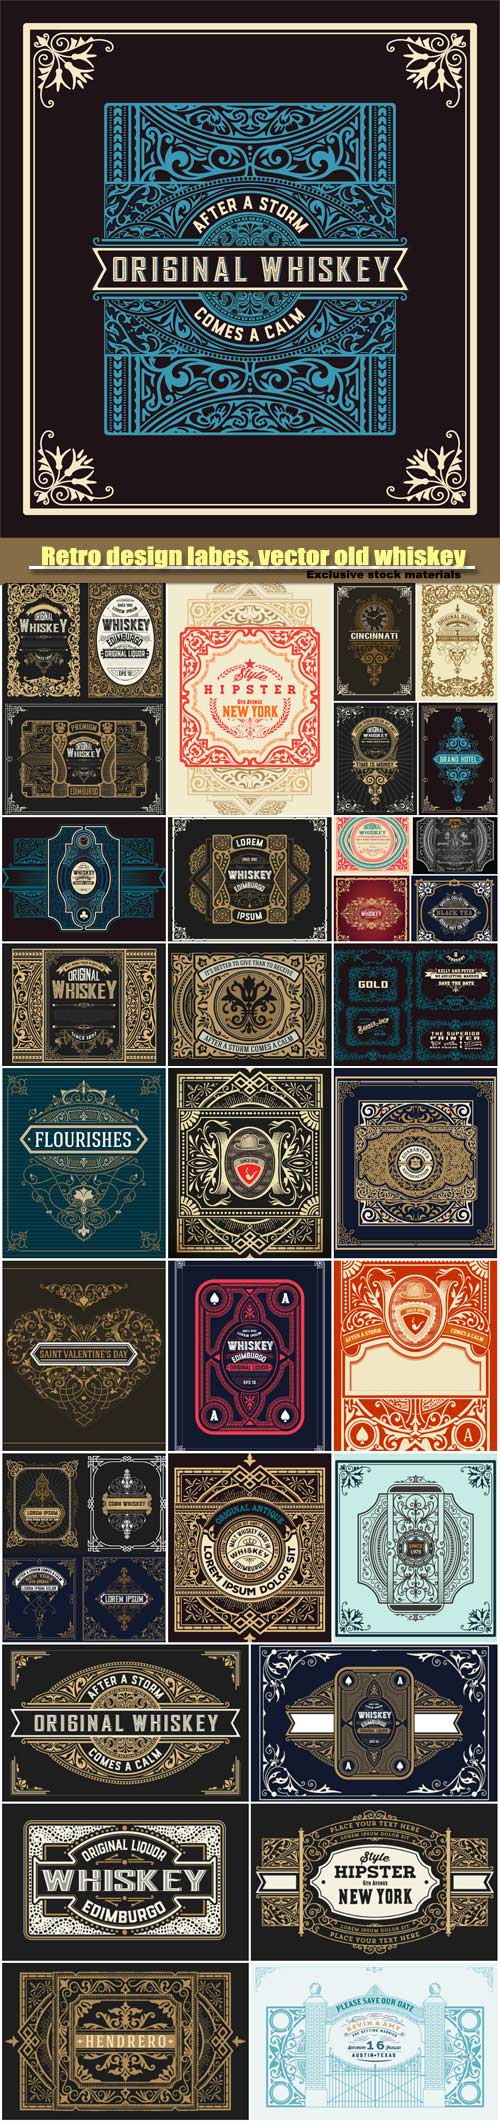 Retro design labes, vector old whiskey label